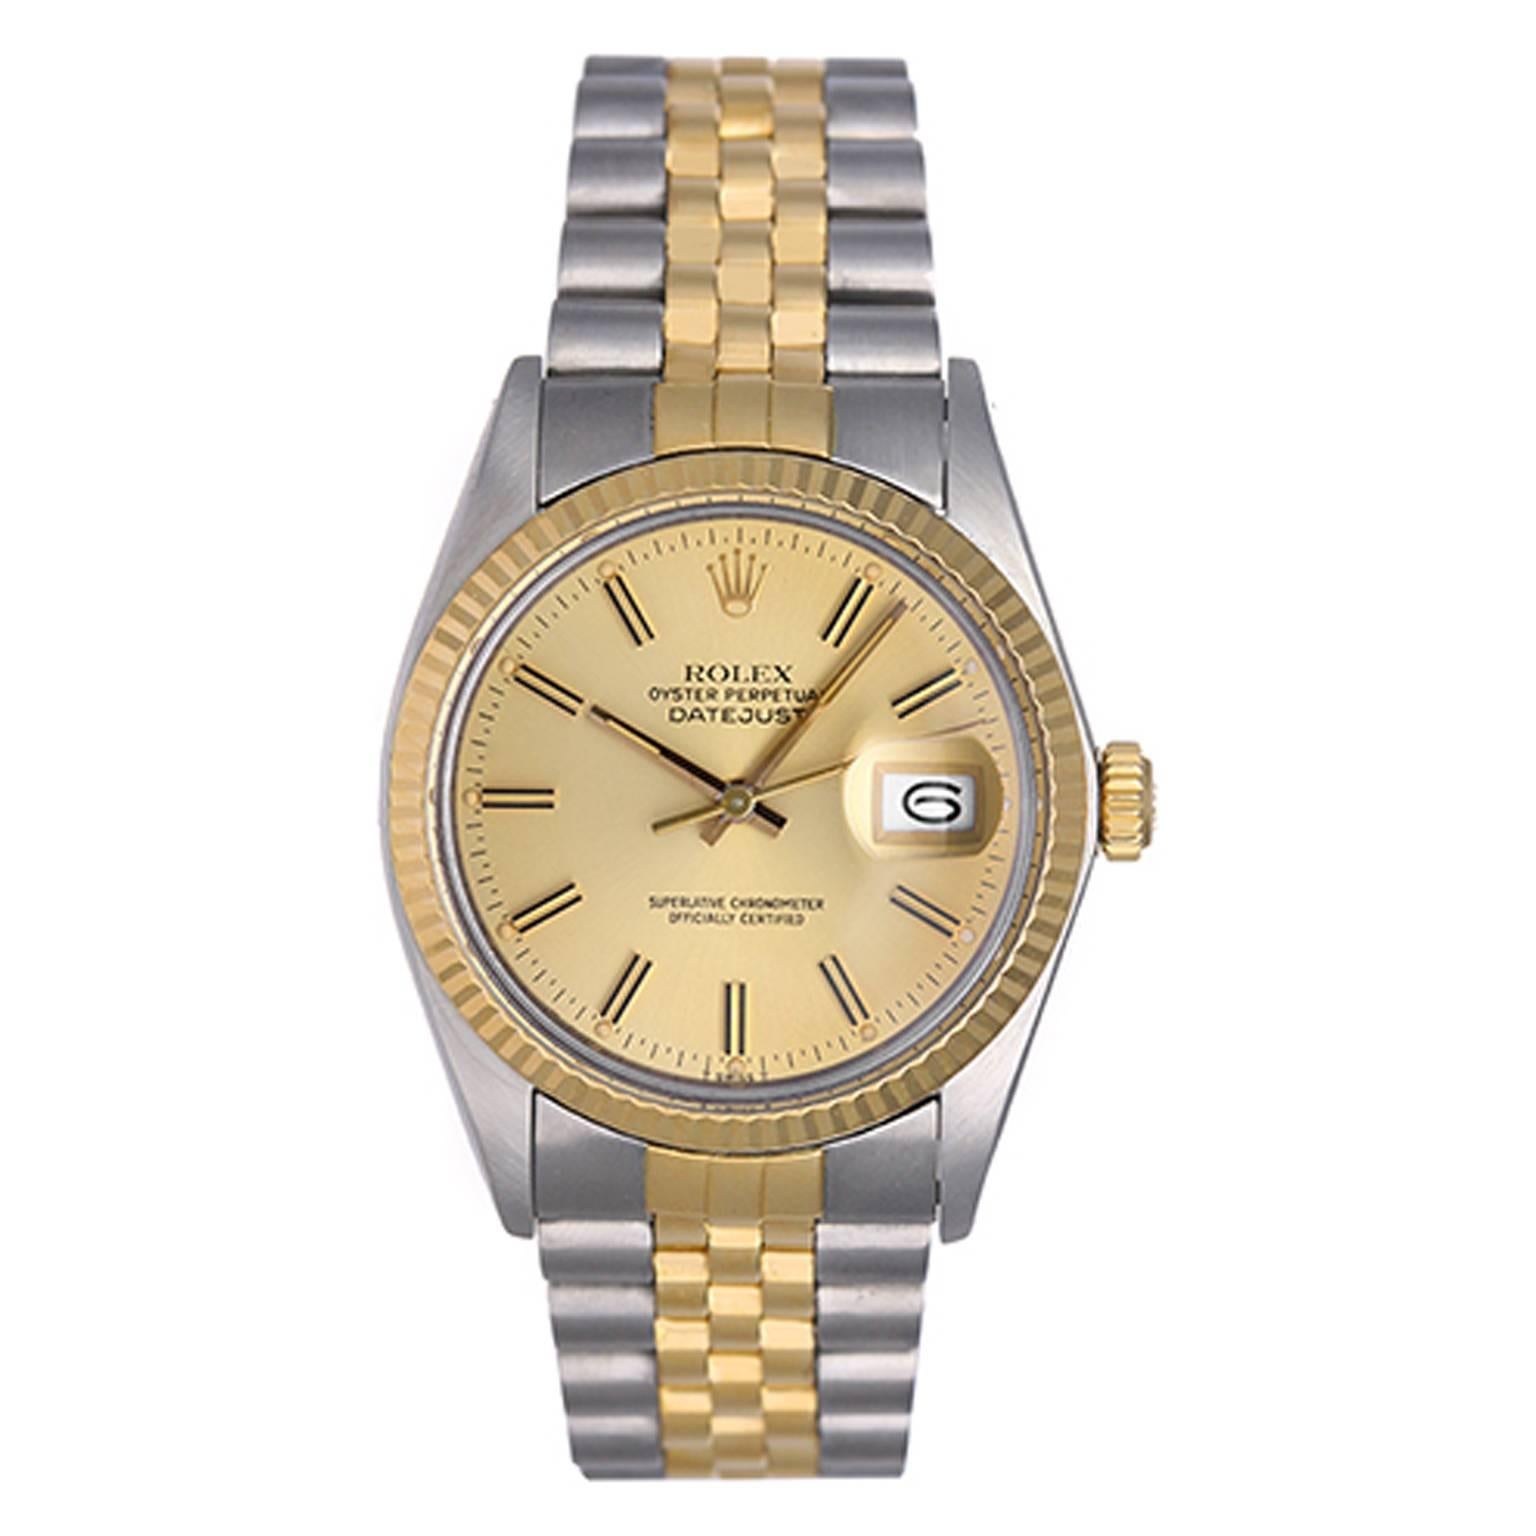 Rolex Yellow Gold Stainless Steel Datejust Automatic Wristwatch Ref 16013